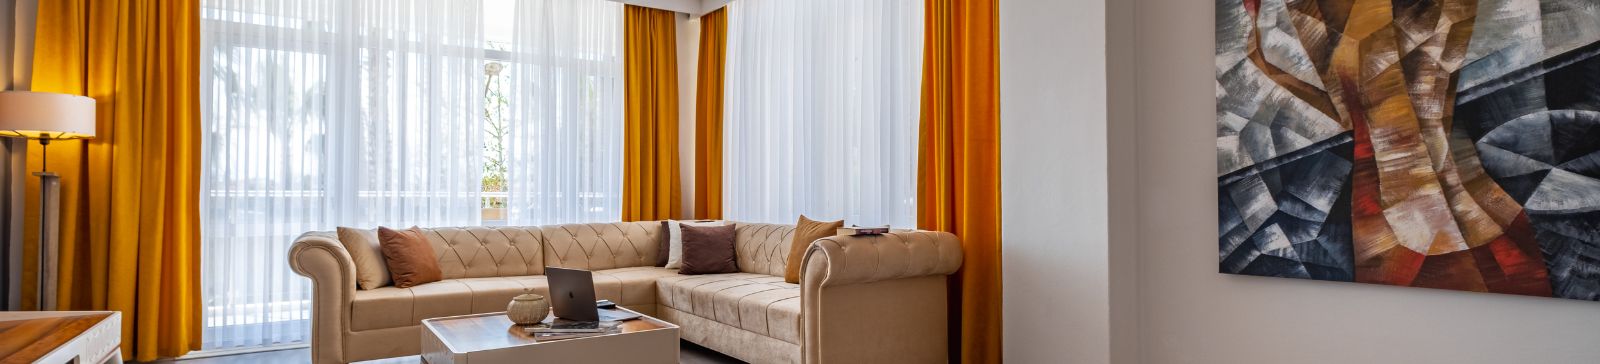 A Complete Guide to Curtains for Your Home